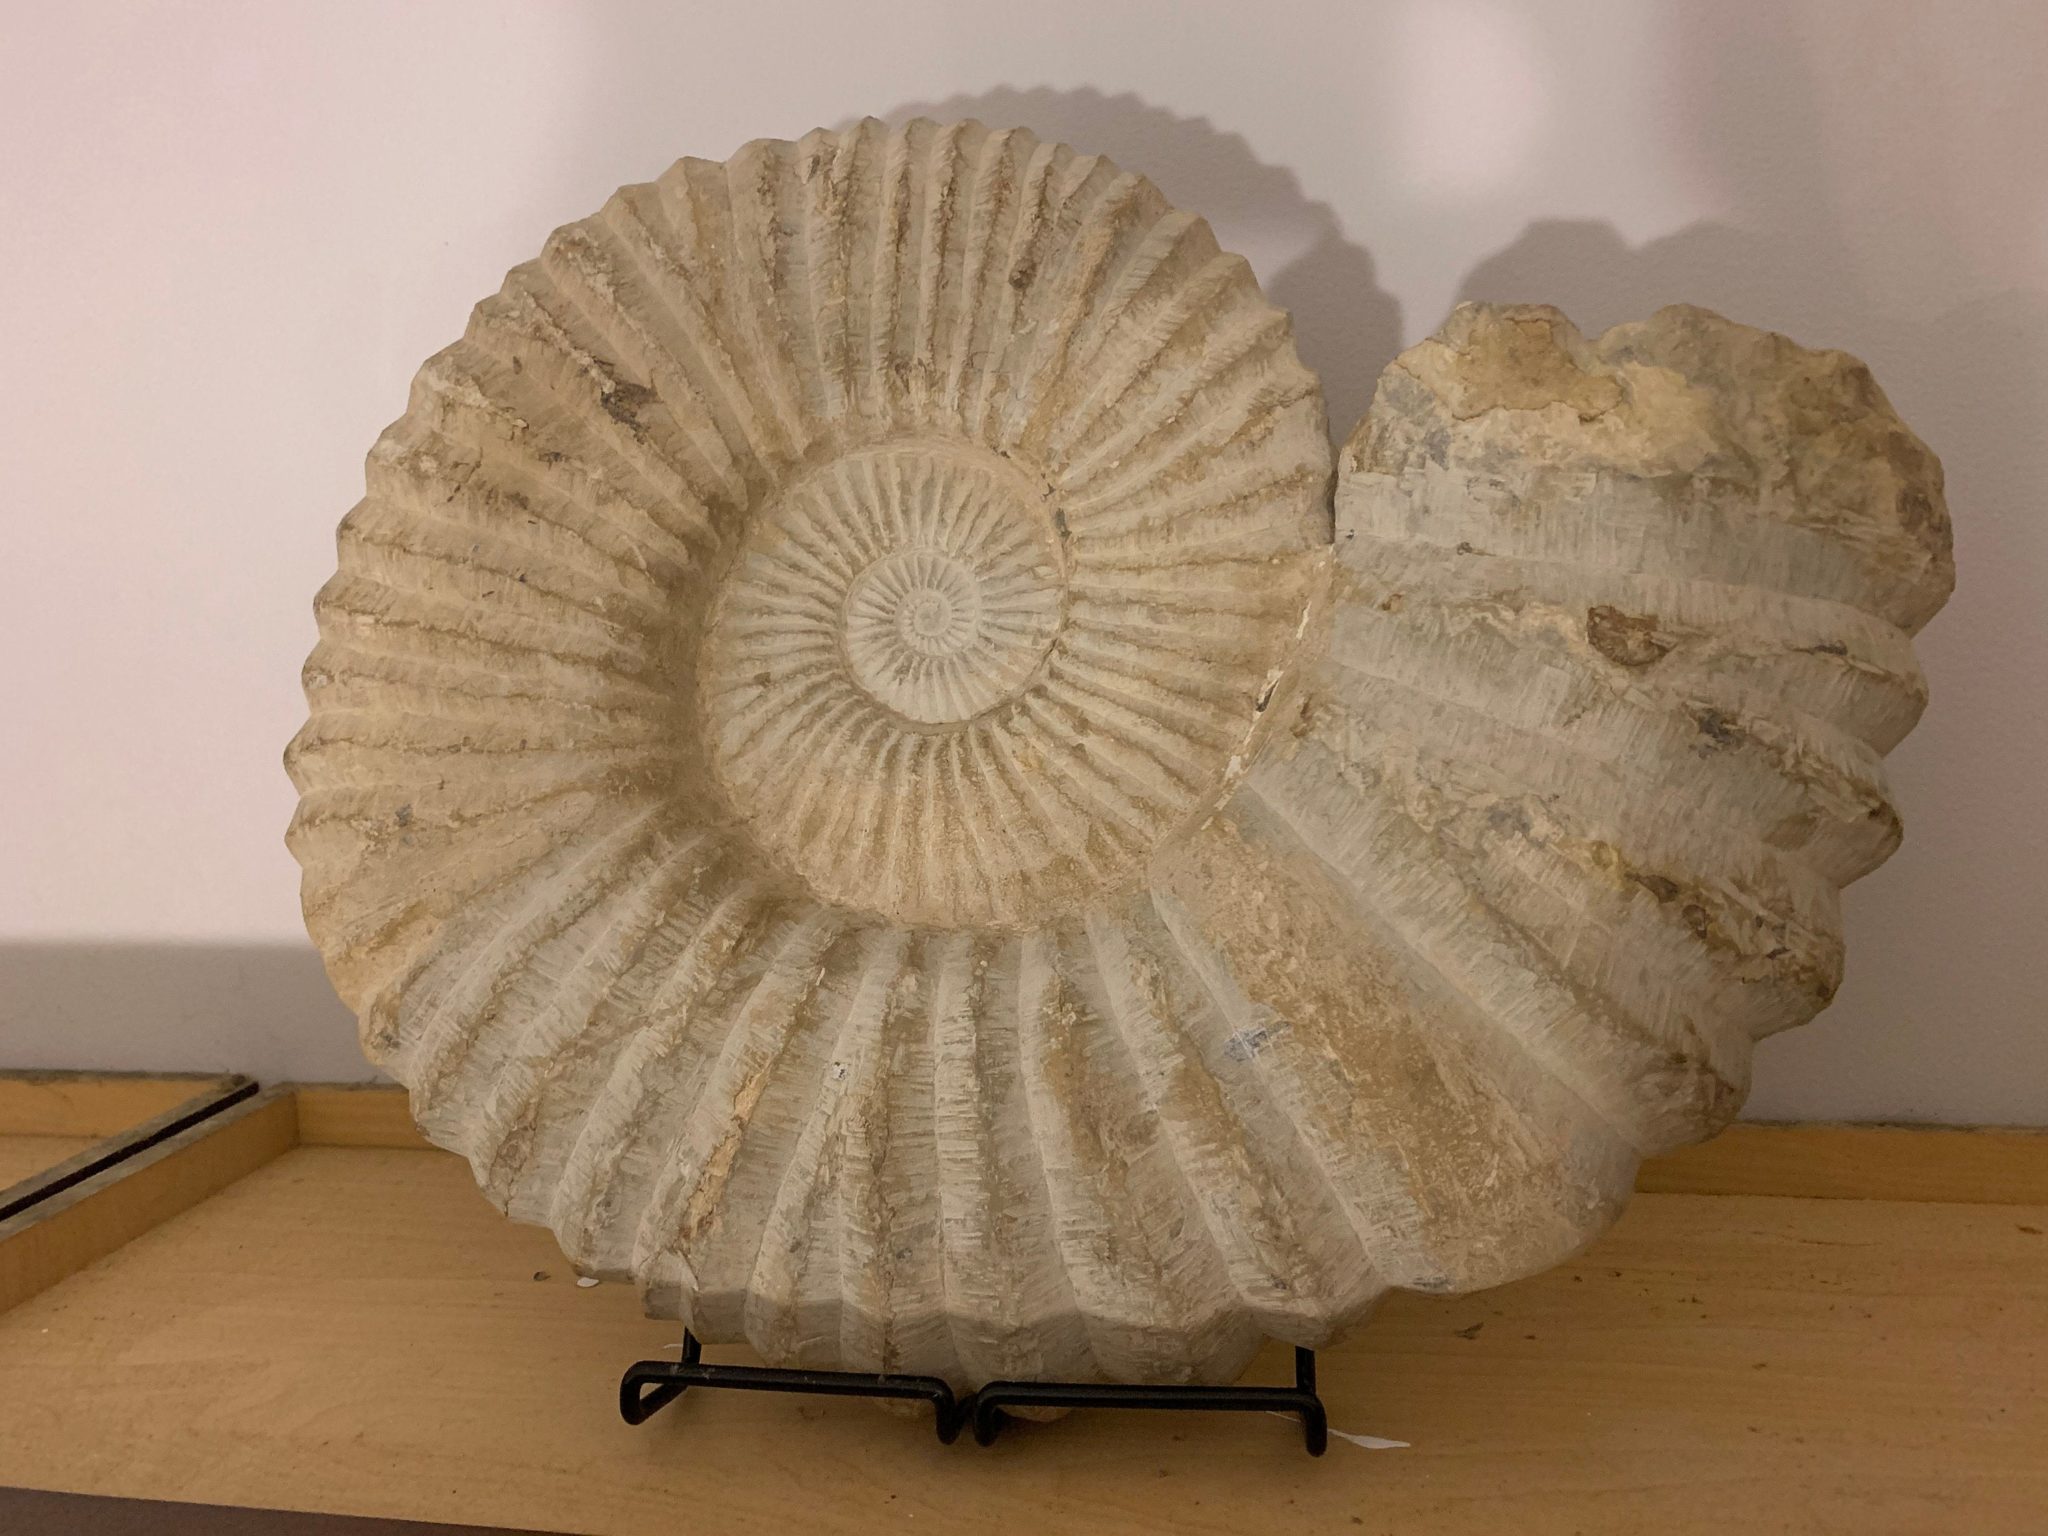 Agadir Ammonite fossil, Collector fossil, 16 inch diameter, very large Prehistoric Online